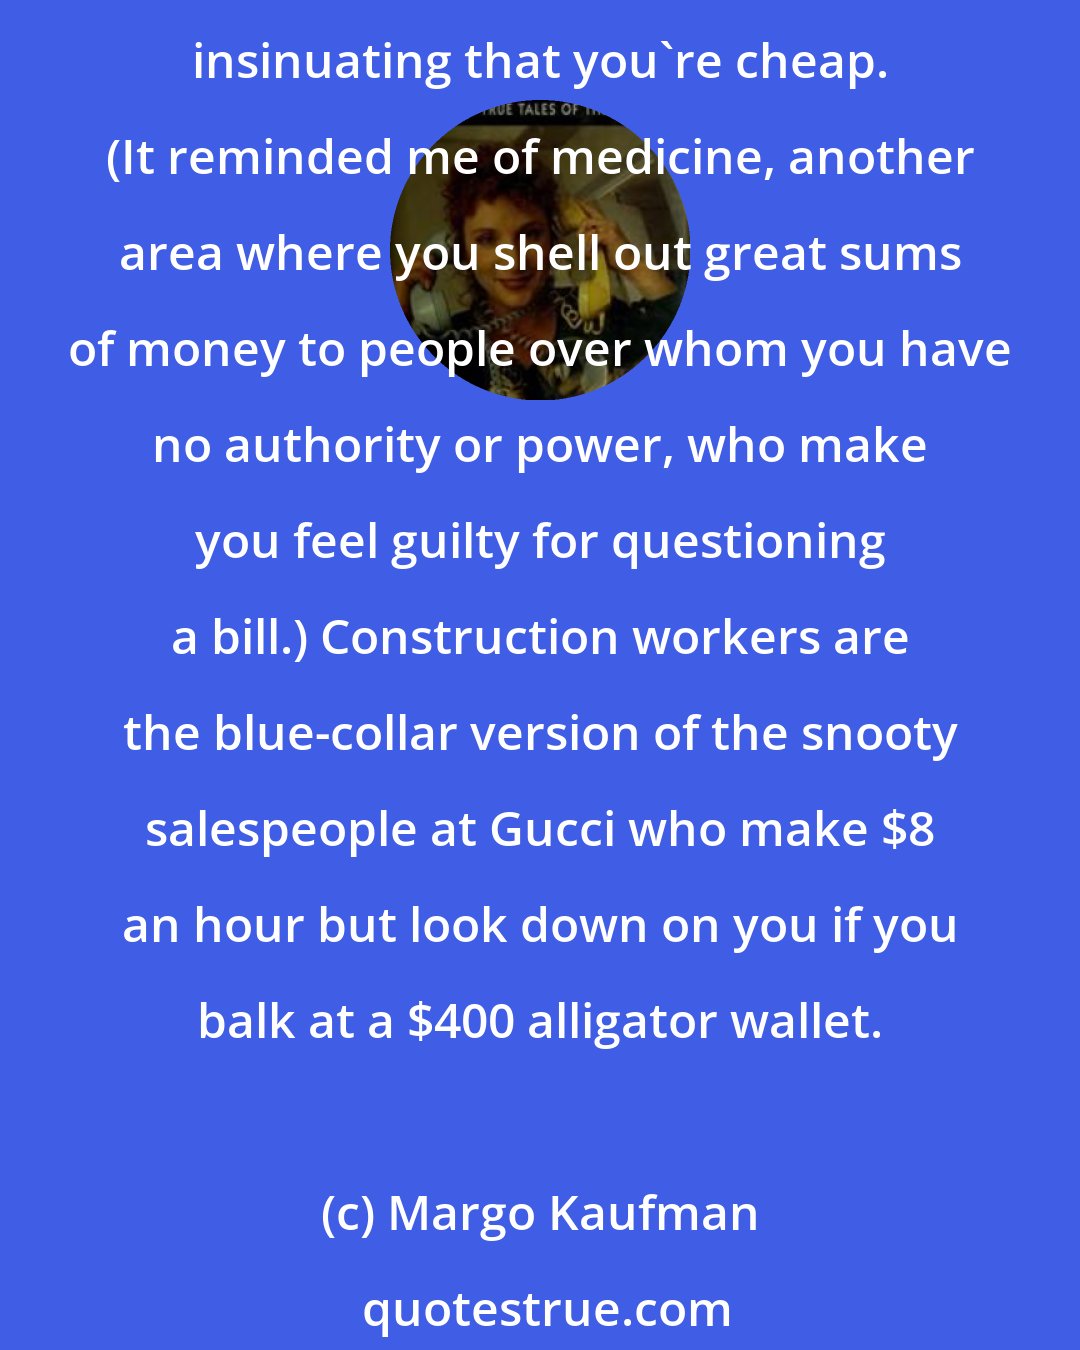 Margo Kaufman: Remodeling defies the principles of modern commerce. You shell out great sums of money to people over whom you have no authority or power, yet these same people are constantly insinuating that you're cheap. (It reminded me of medicine, another area where you shell out great sums of money to people over whom you have no authority or power, who make you feel guilty for questioning a bill.) Construction workers are the blue-collar version of the snooty salespeople at Gucci who make $8 an hour but look down on you if you balk at a $400 alligator wallet.